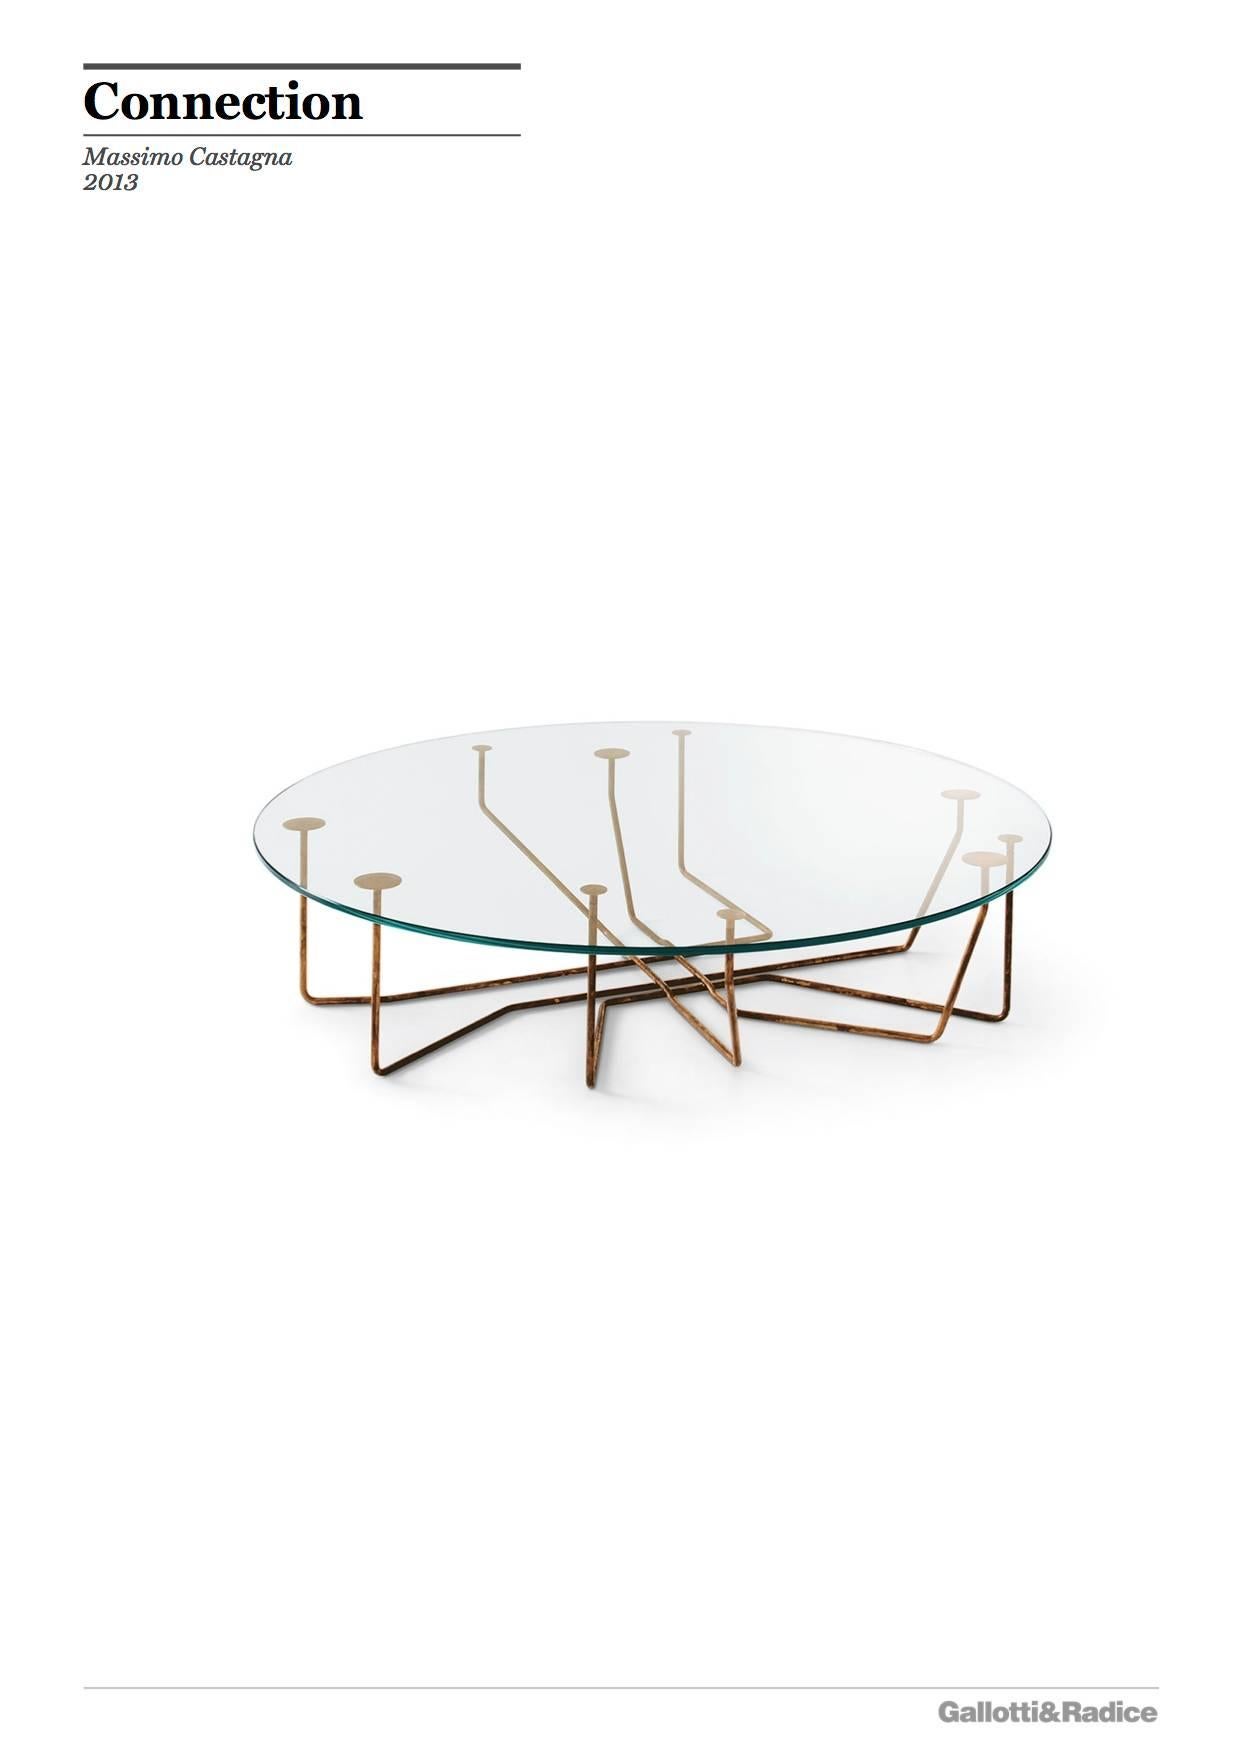 Contemporary Gallotti & Radice Connection Table in Hand Burnished Brass and Extralight Glass For Sale